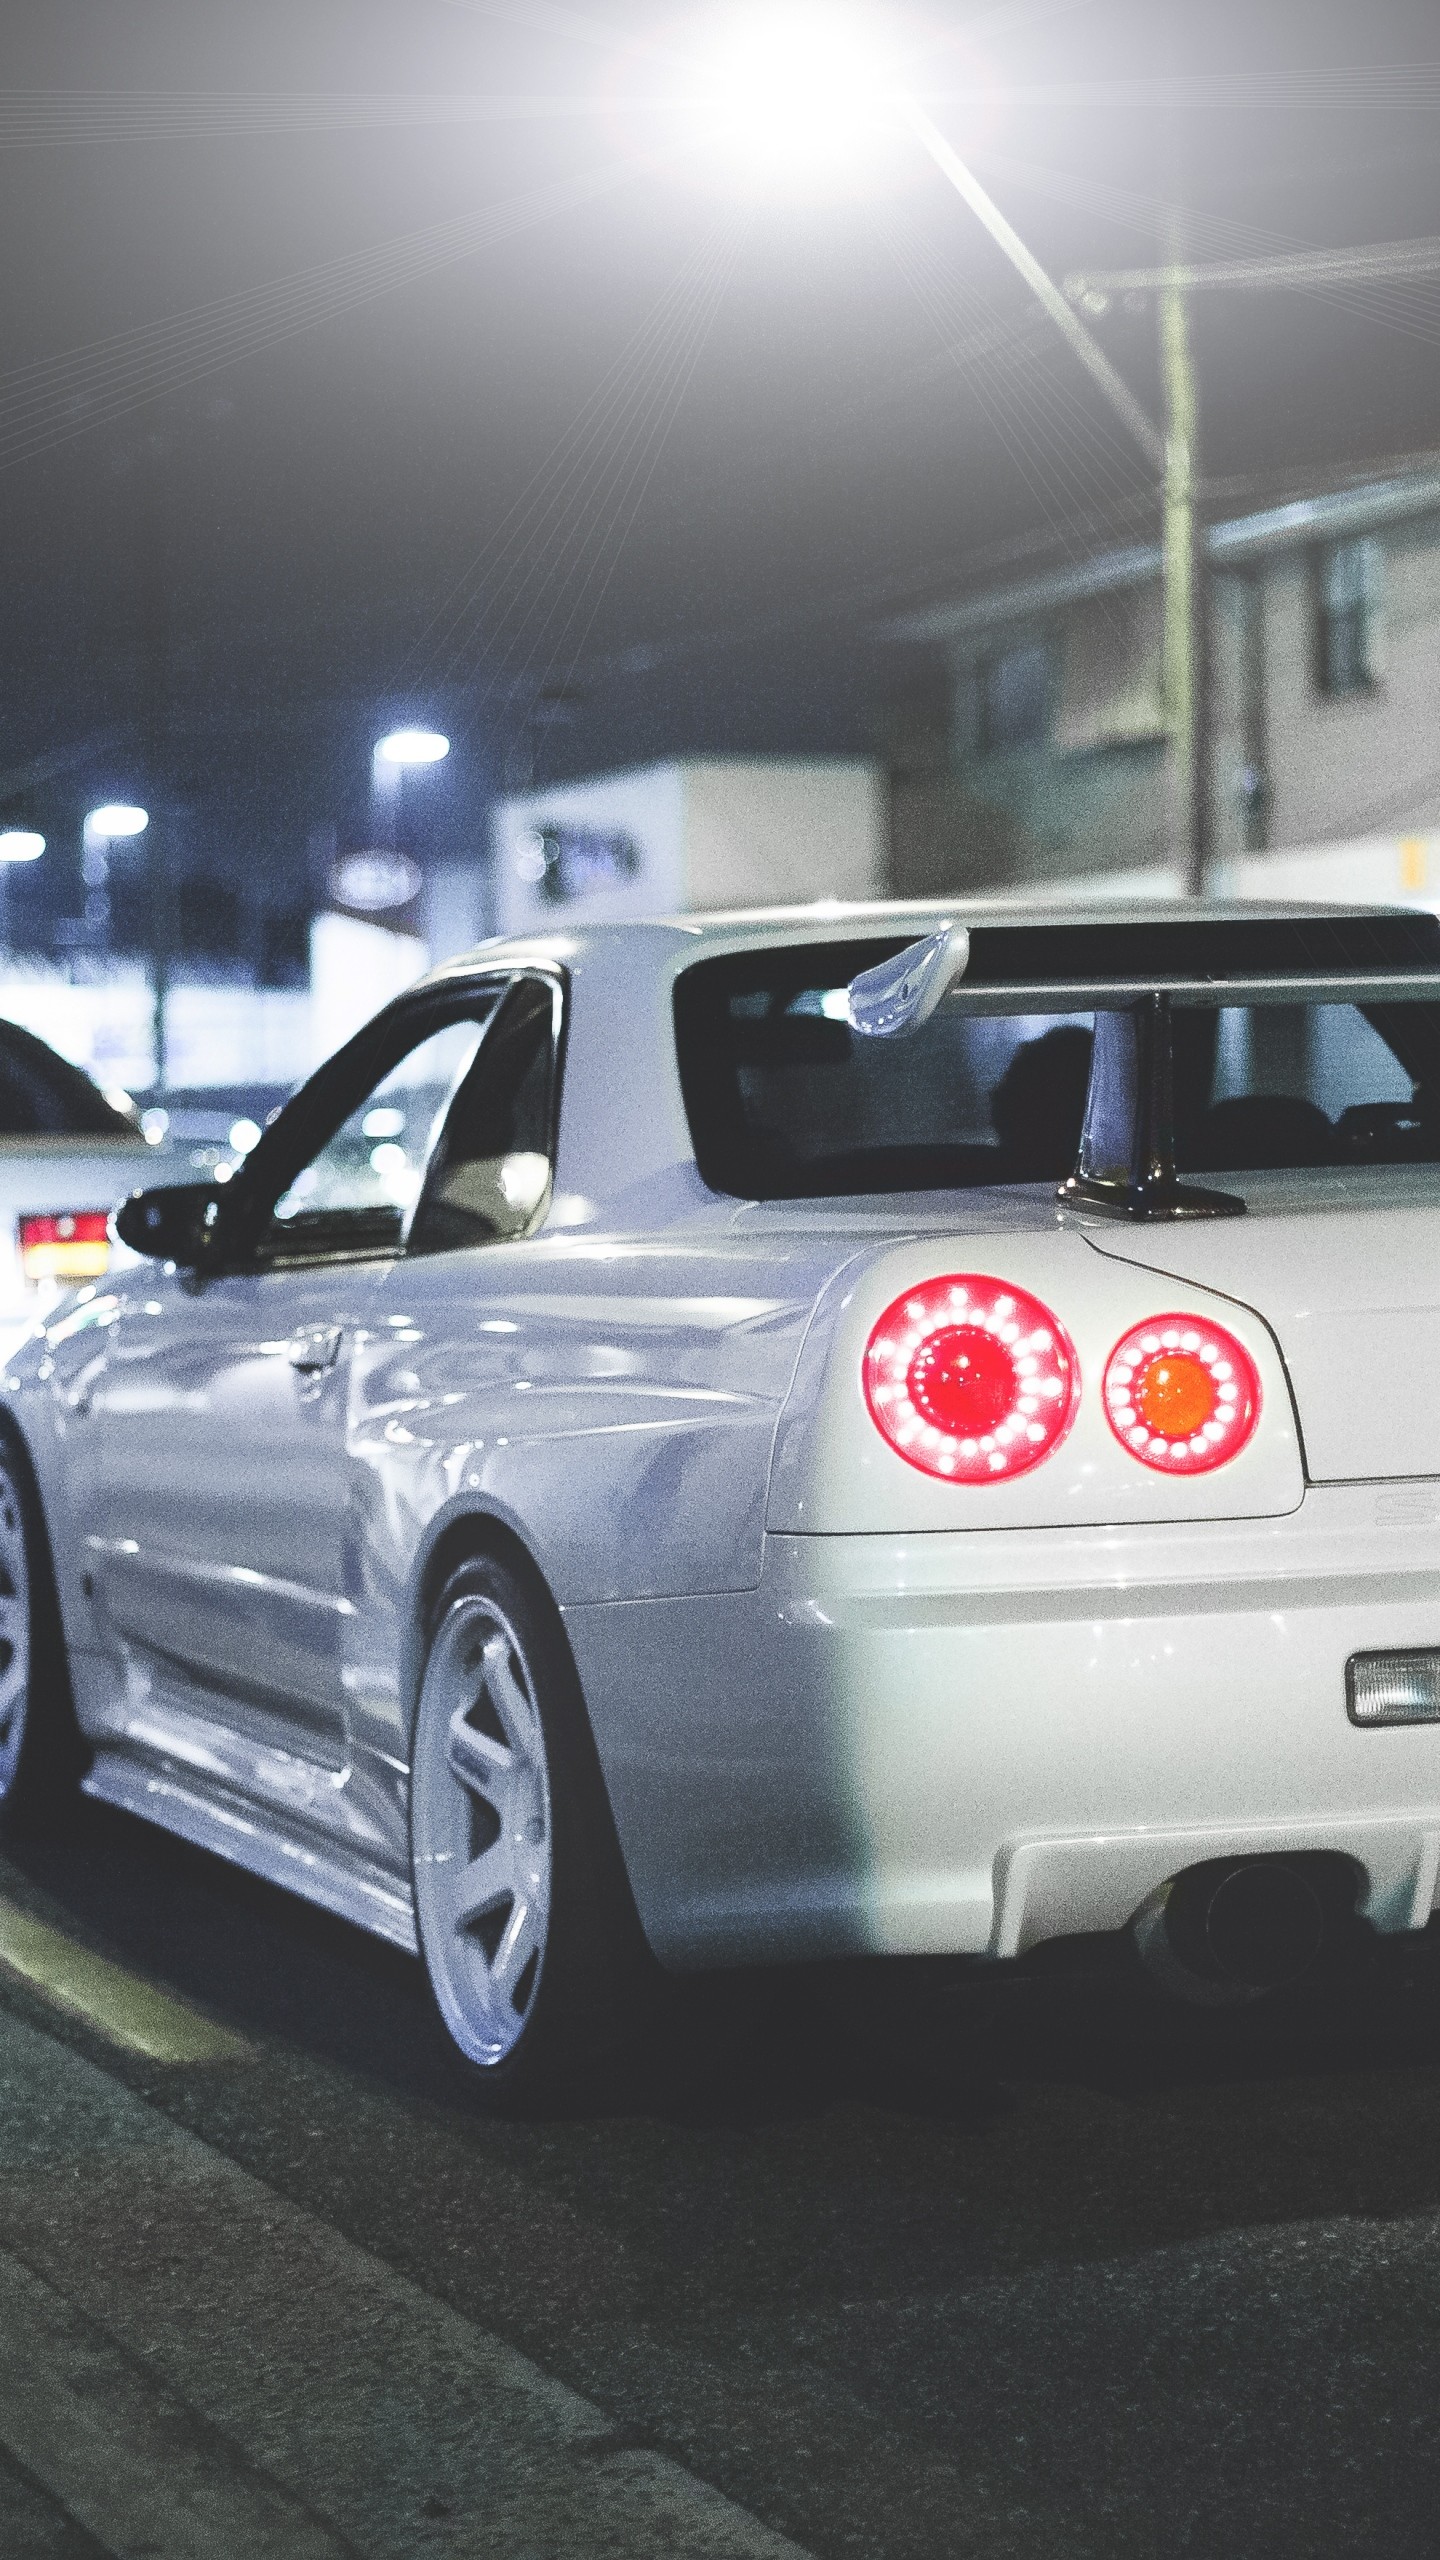 Nissan Skyline Gt R R34 Wallpapers 69 Pictures